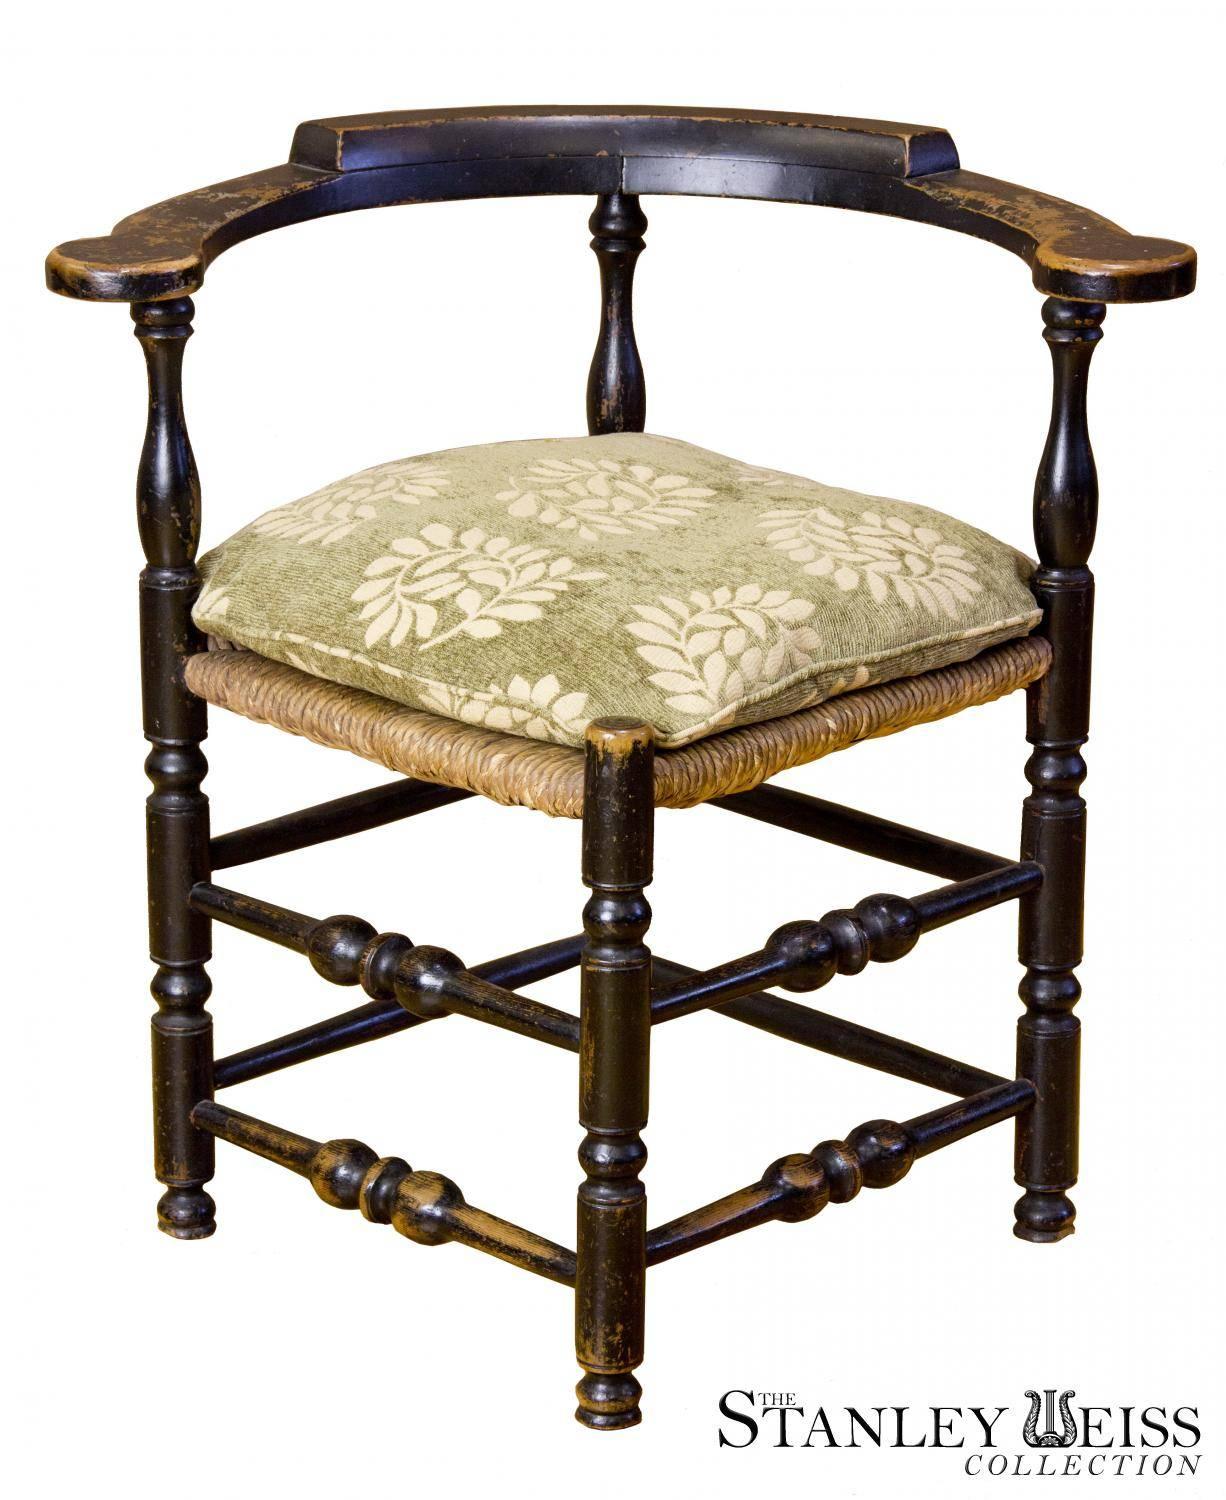 Corner chairs exist to be found but special ones in fine condition with an older surface such as this are rarities.  What draws one to this piece are the cross stretchers which have double sets of turnings on each side.   A related armchair in our